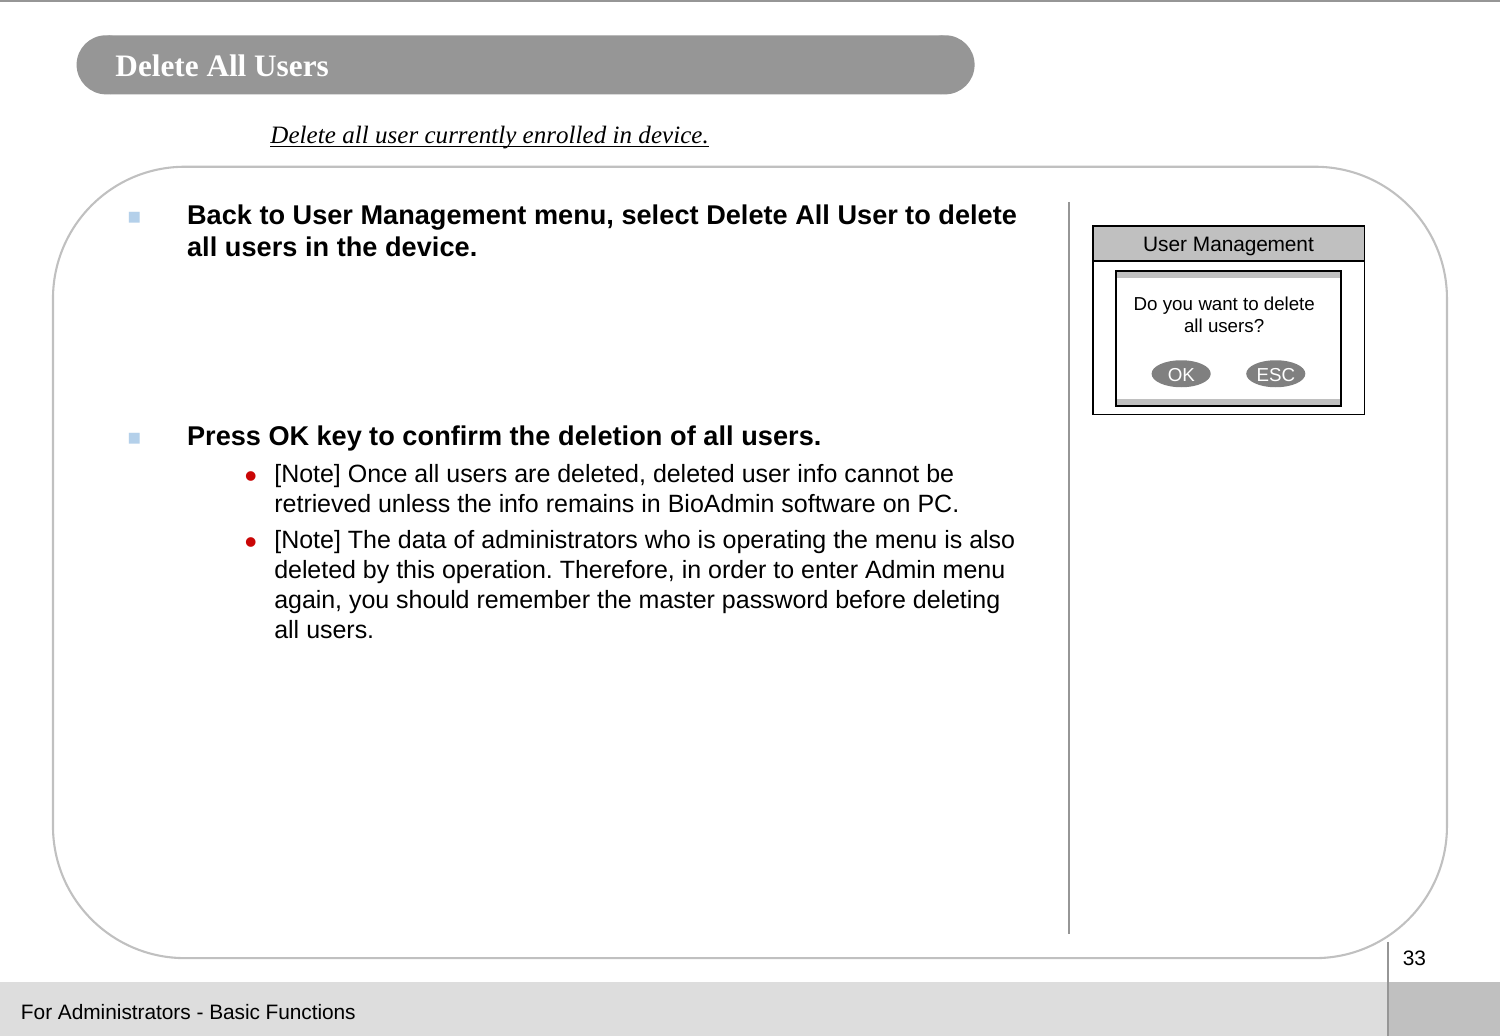 33Delete All UsersBack to User Management menu, select Delete All User to delete all users in the device.Press OK key to confirm the deletion of all users.z[Note] Once all users are deleted, deleted user info cannot be retrieved unless the info remains in BioAdmin software on PC. z[Note] The data of administrators who is operating the menu is also deleted by this operation. Therefore, in order to enter Admin menu again, you should remember the master password before deleting all users.Delete all user currently enrolled in device. User ManagementDo you want to delete all users?OK ESCFor Administrators - Basic Functions